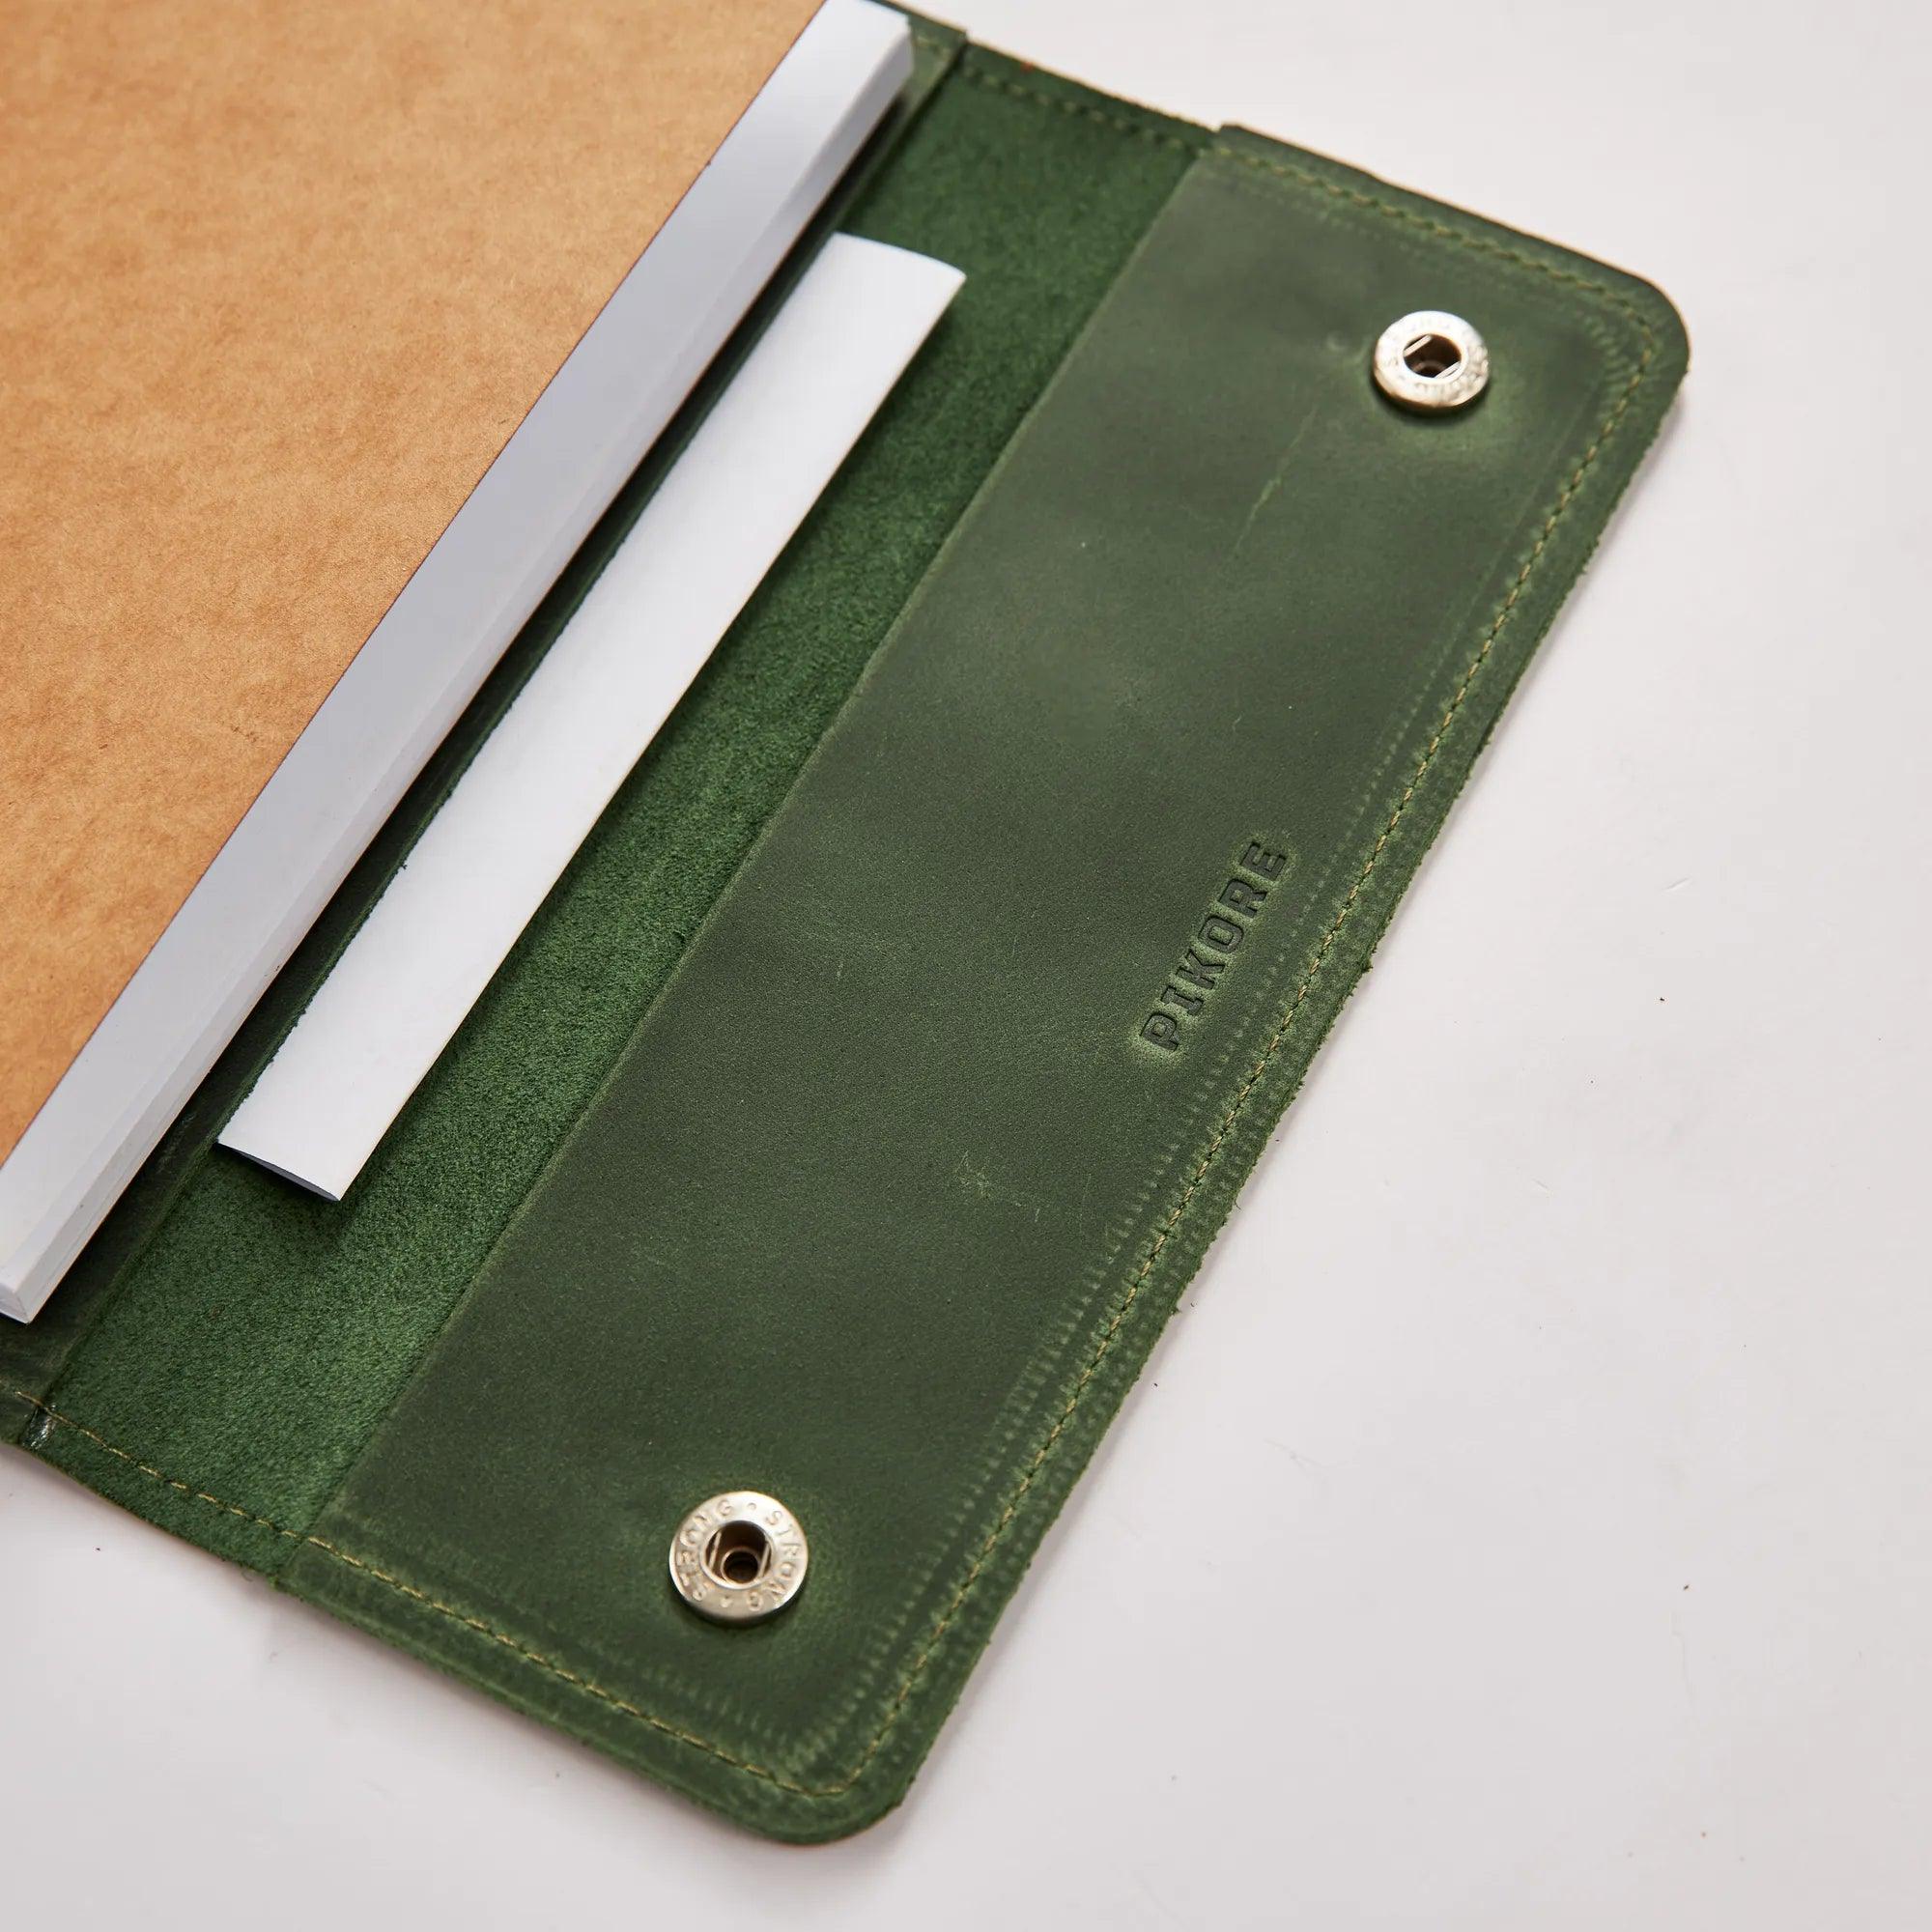 Leather Notebook Cover - Pikore